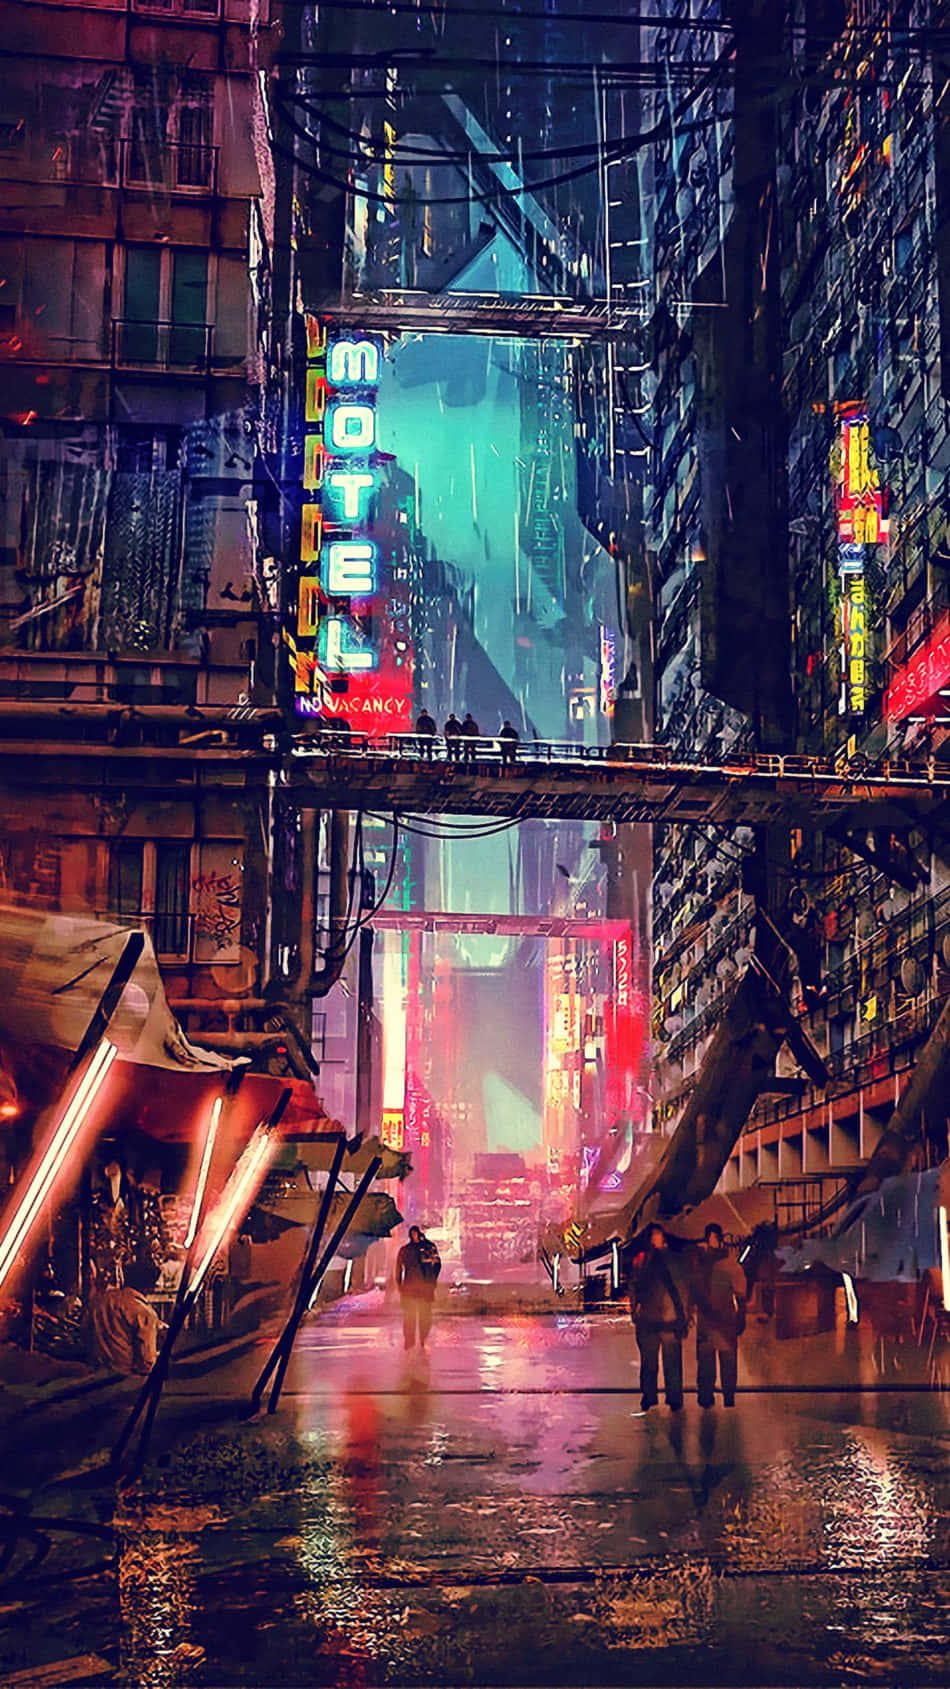 Welcome to the high-tech neon future of Cyberpunk City